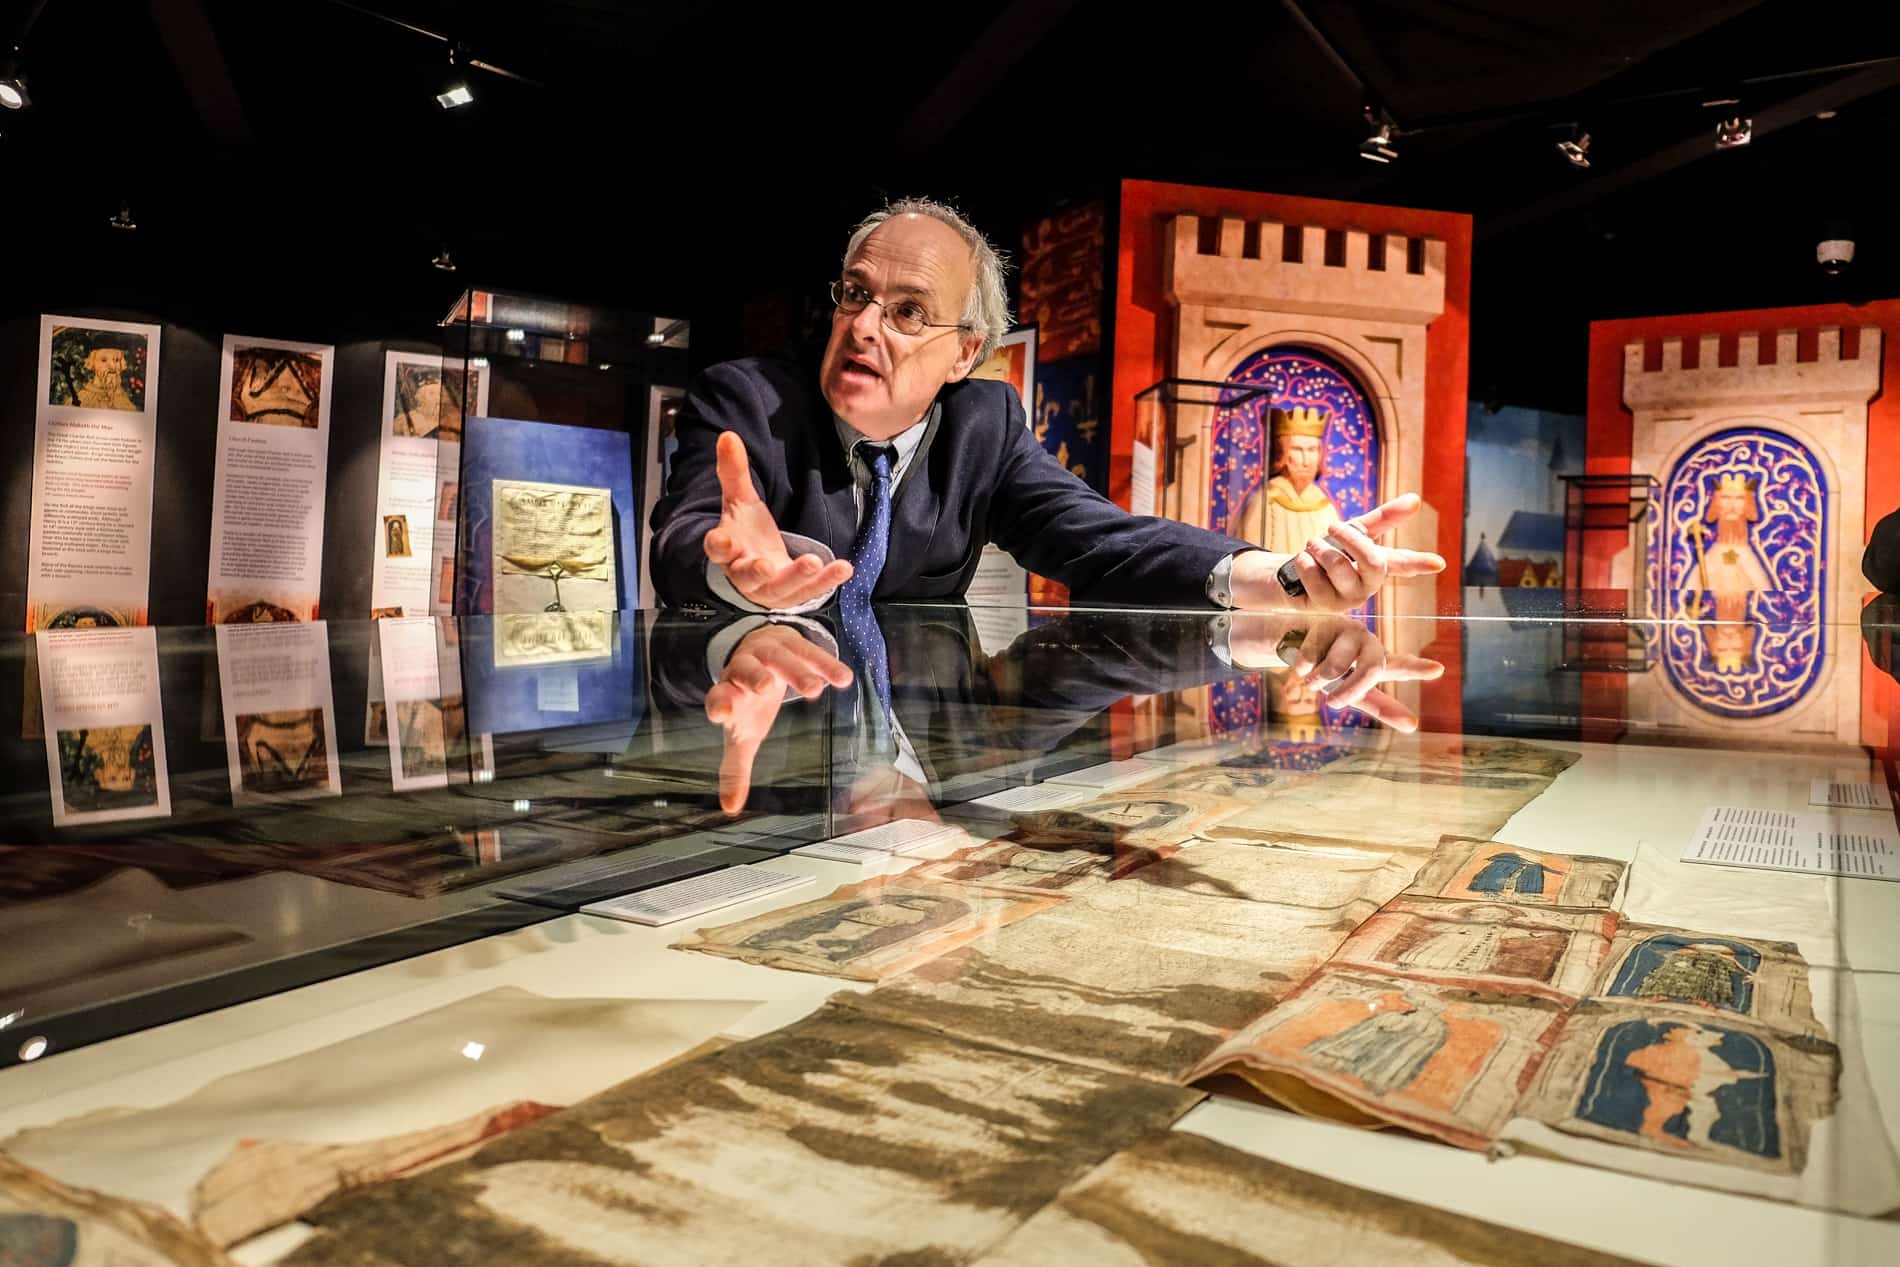 A curator leans on a glass cabinet explaining artefacts at the Medieval Museum in Waterford, Ireland.